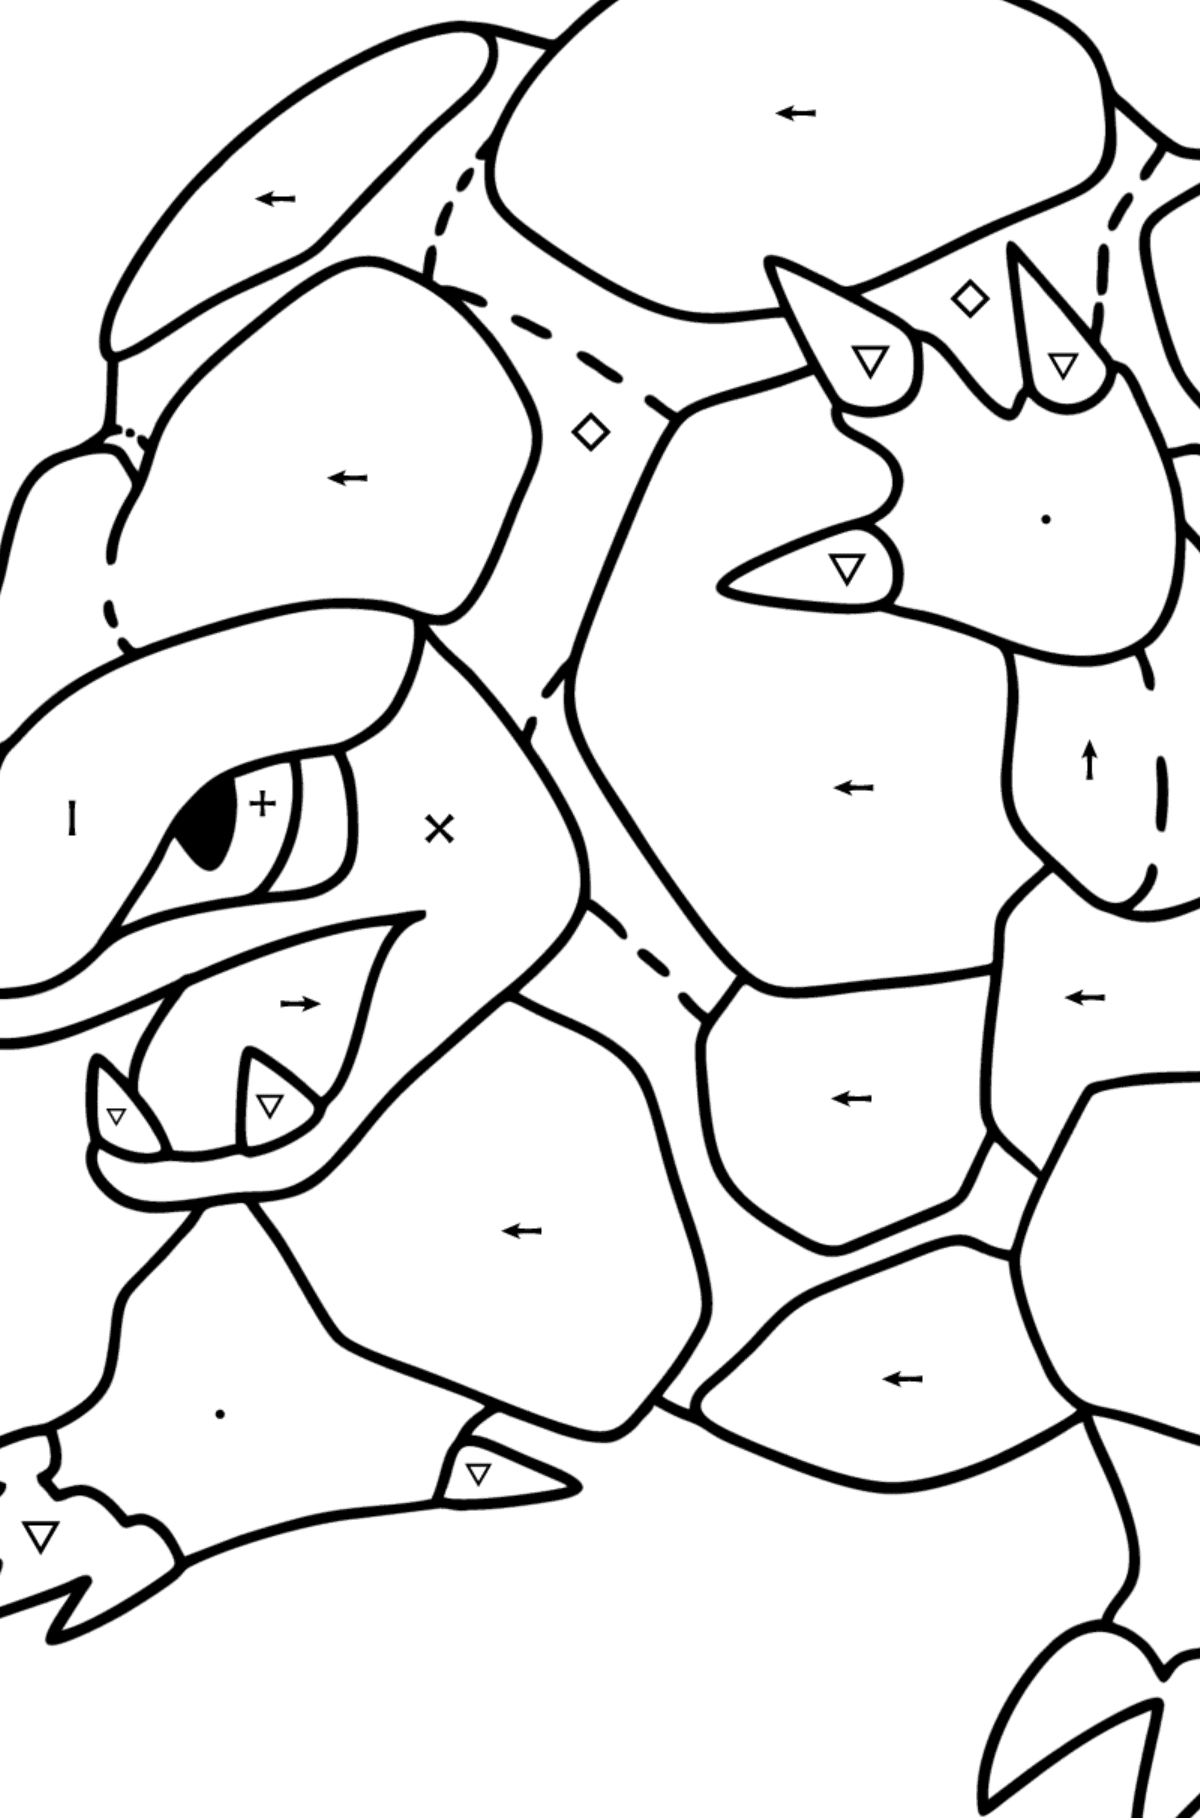 Pokemon Go Golem coloring page - Coloring by Symbols for Kids